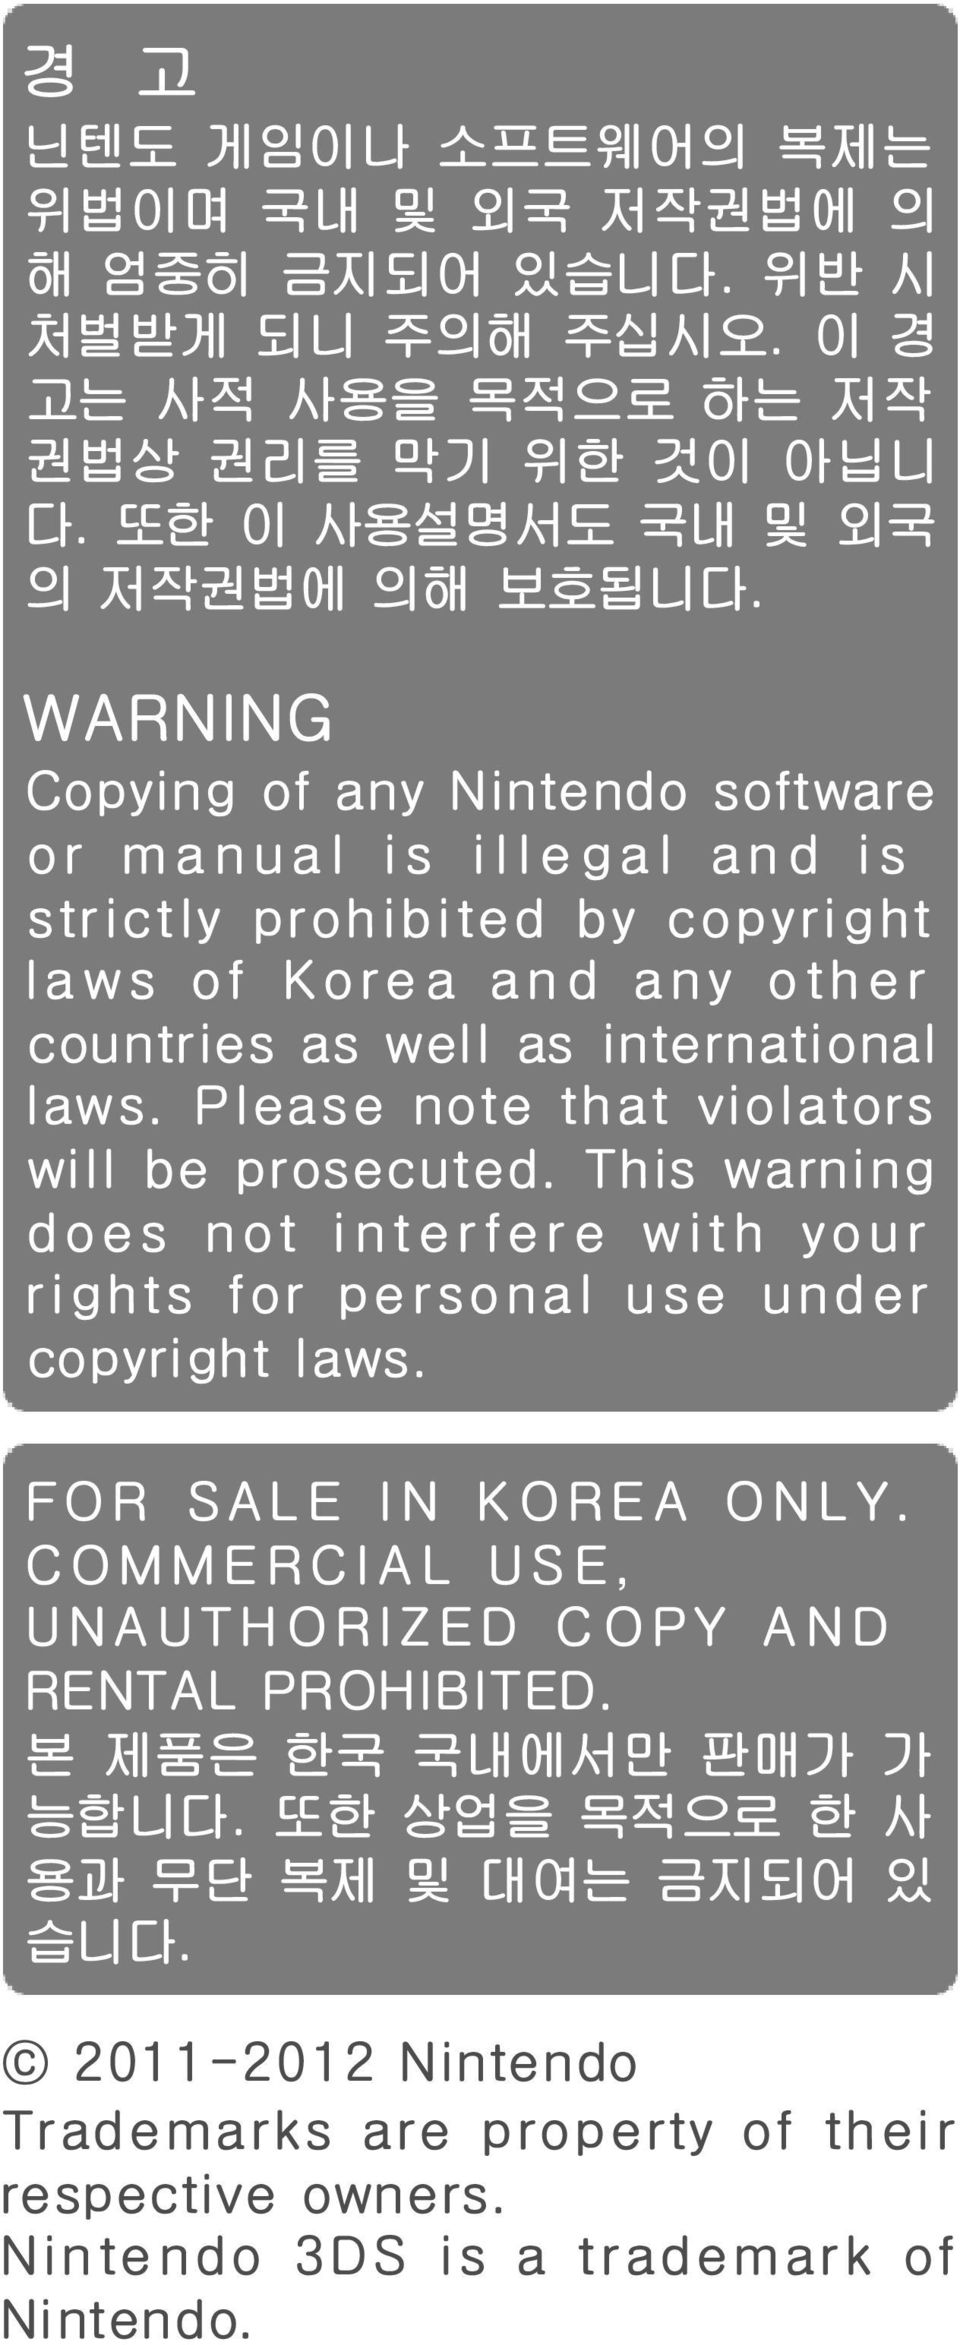 Please note that violators will be prosecuted. This warning does not interfere with your rights for personal use under copyright laws. FOR SAL E IN K ORE A ONL Y.